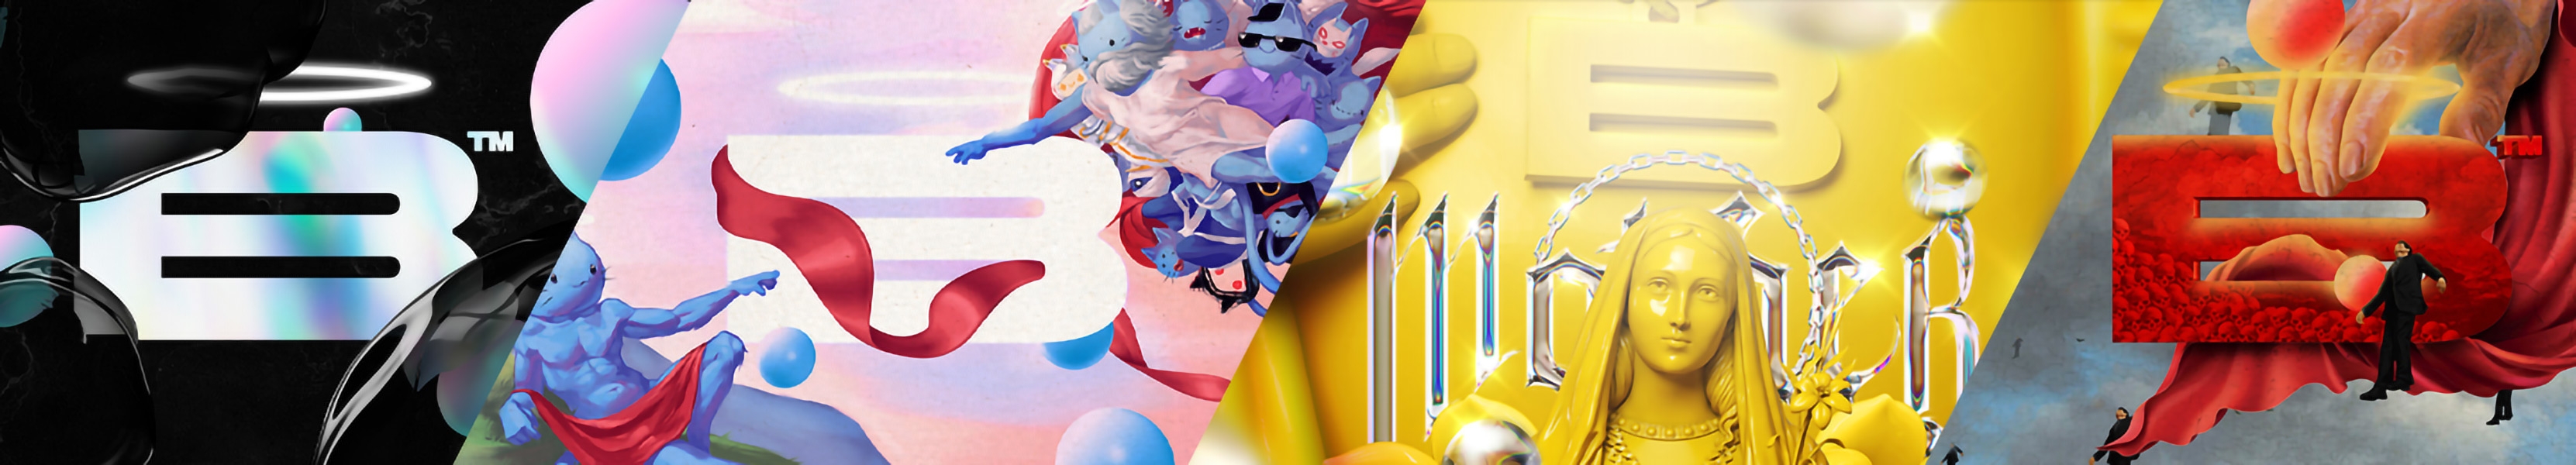 B Collective banner